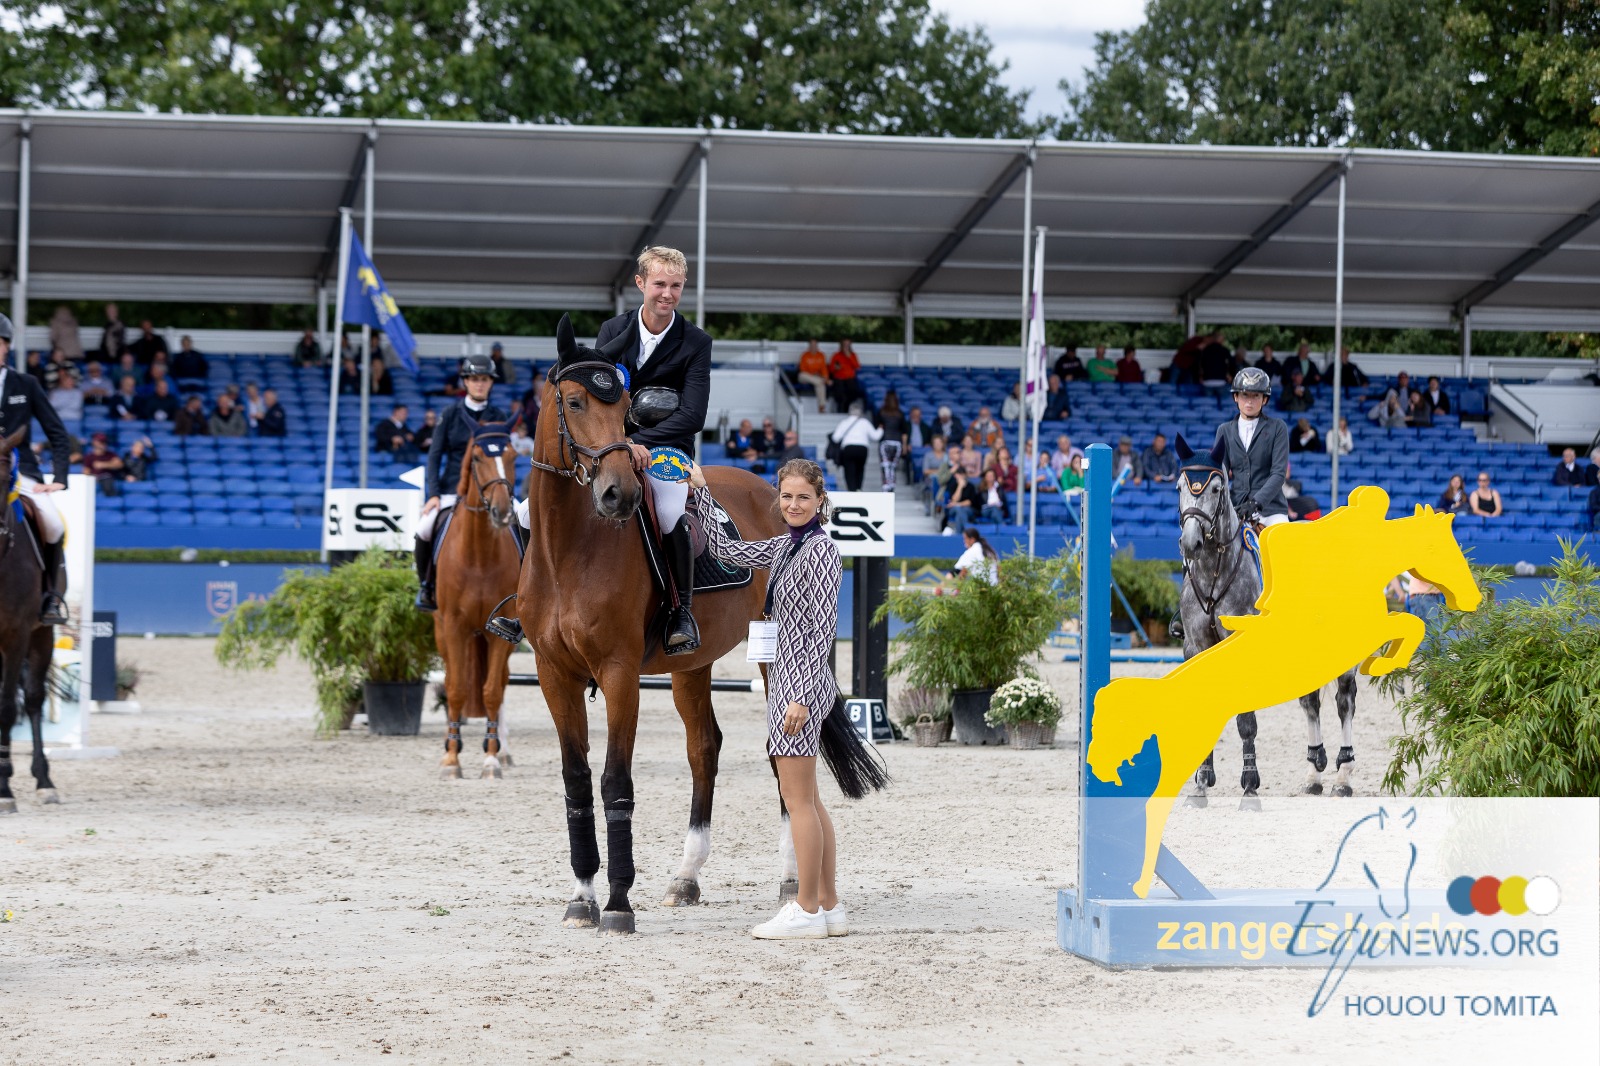 Gilles Thomas and Lavanoche T&L Z best in second qualifier for World Championship 7YO